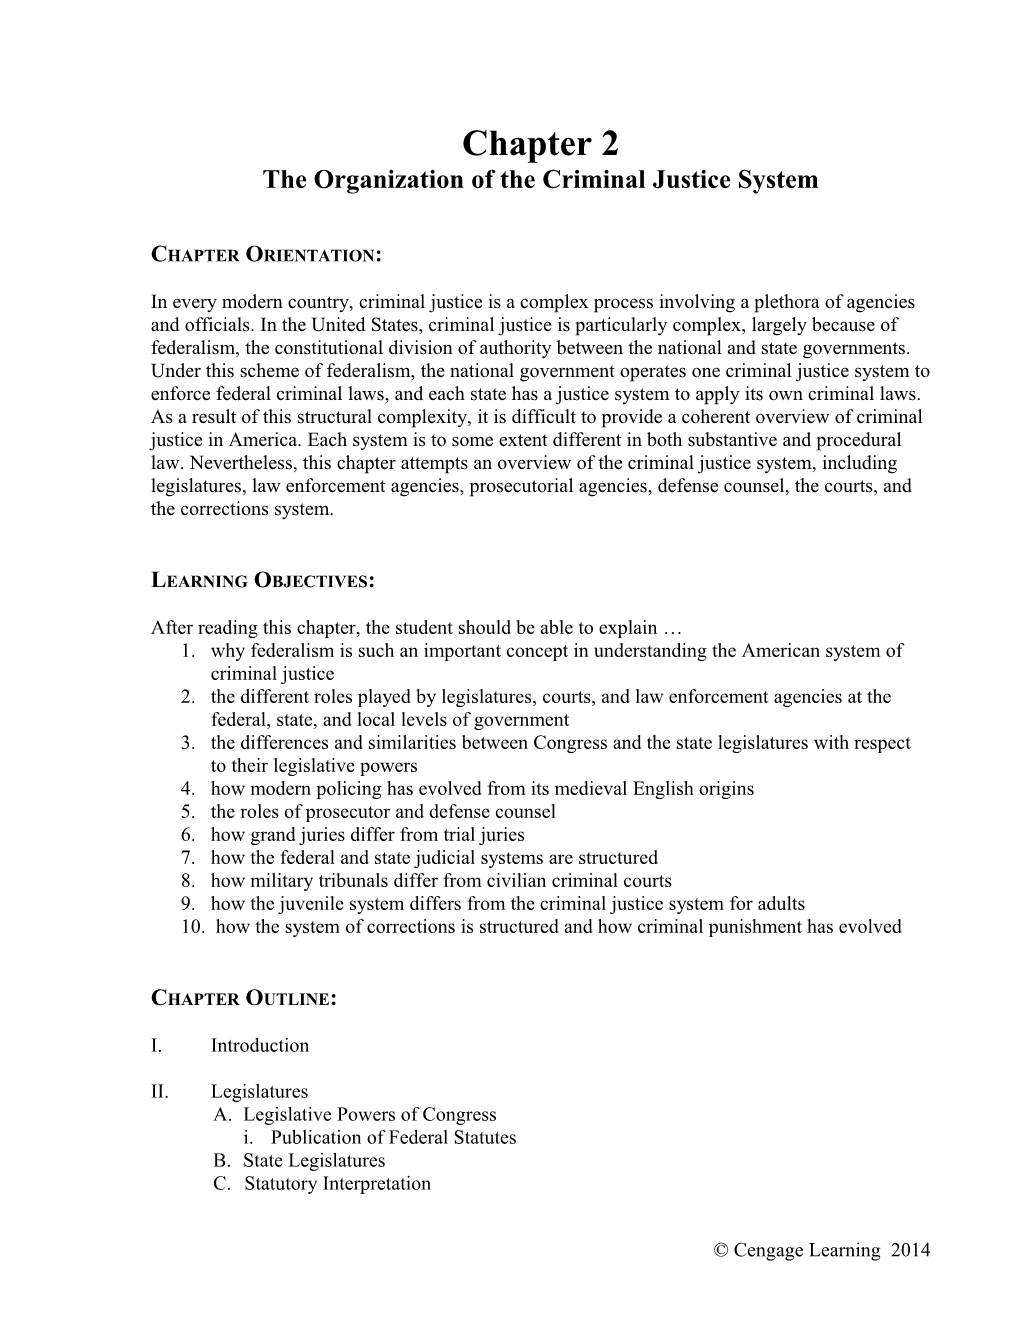 The Organization of the Criminal Justice System